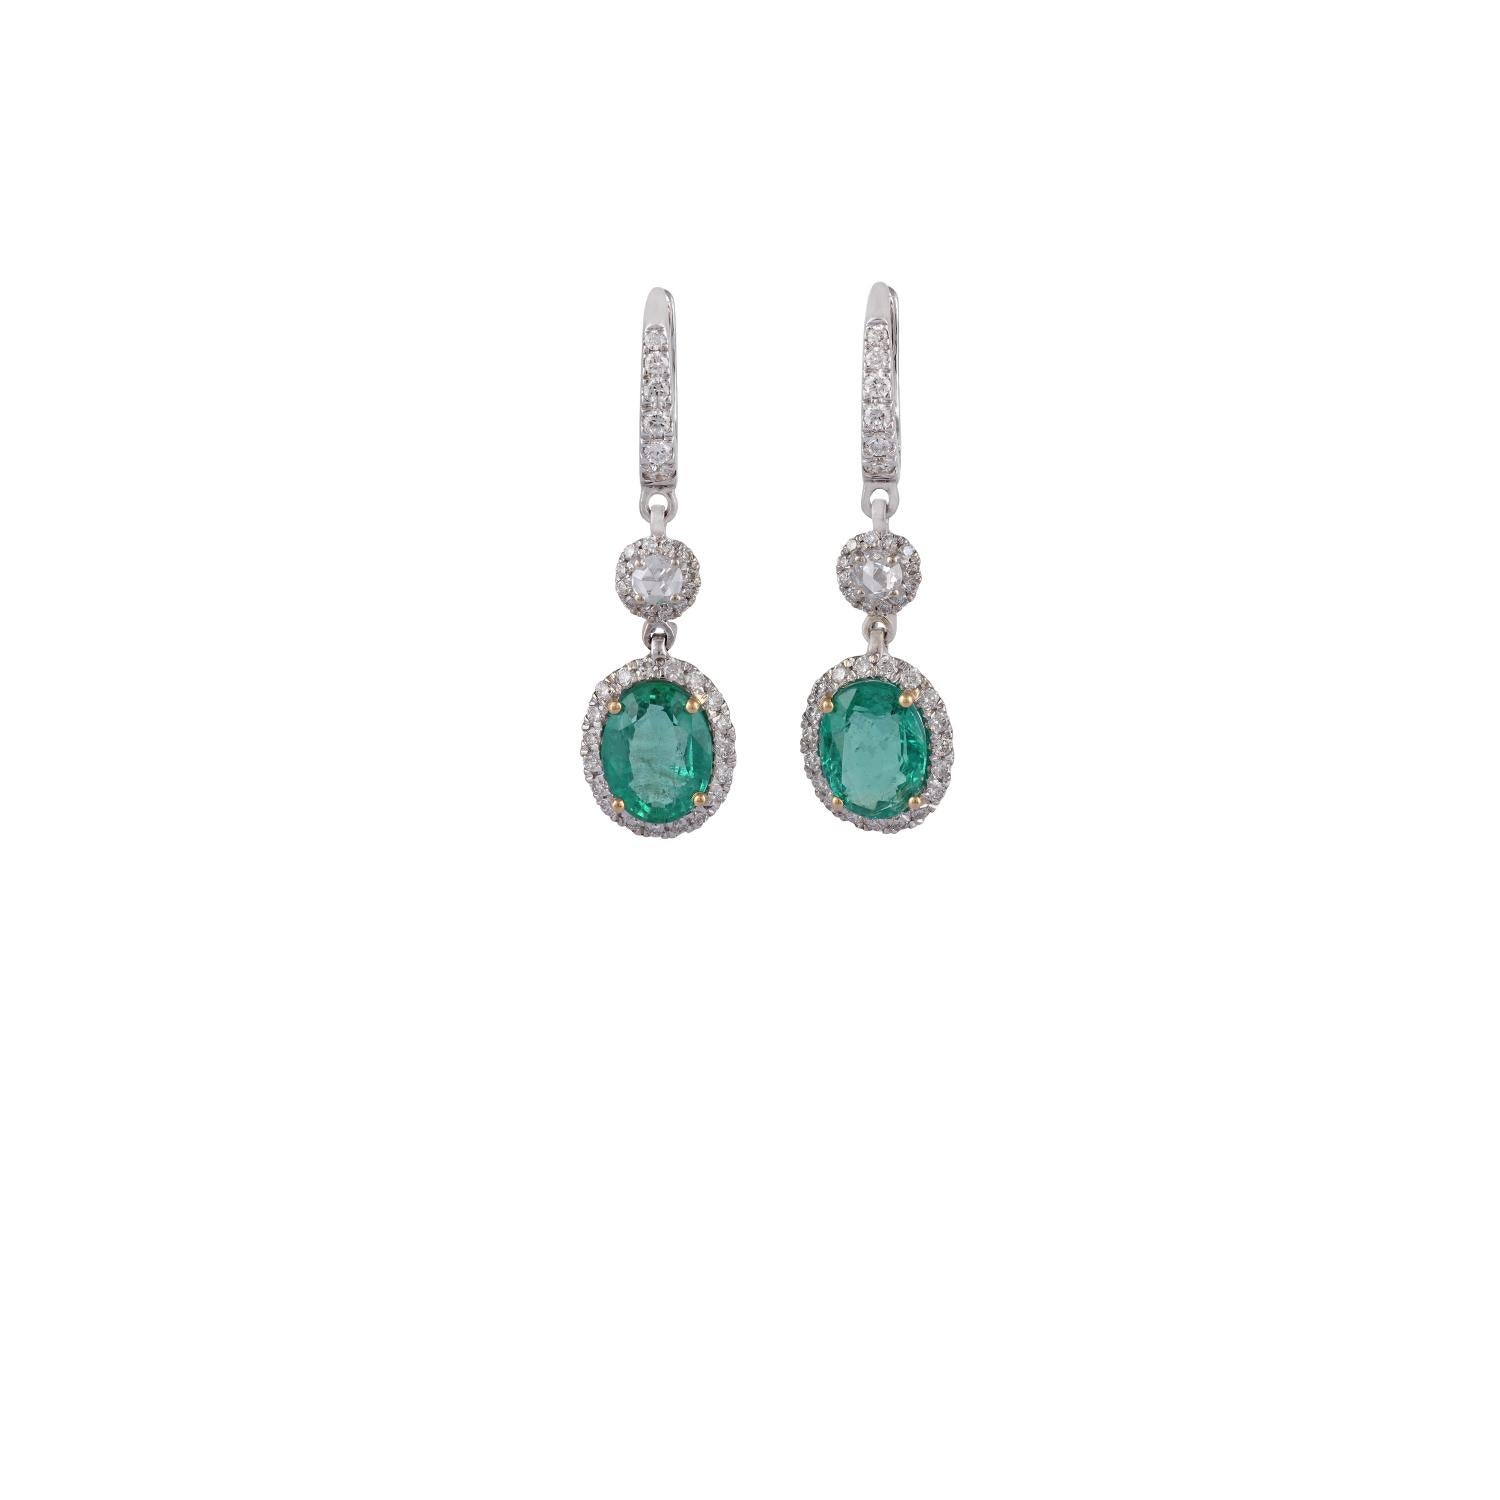 This is an elegant dangle earring pair with emerald & diamonds feature 2 pieces of oval-shaped emeralds weight 3.33 carats, 2 pieces of rose-cut diamonds weight 0.16 carat & 61 pieces of a round brilliant cut diamonds weight 0.65 carats, these